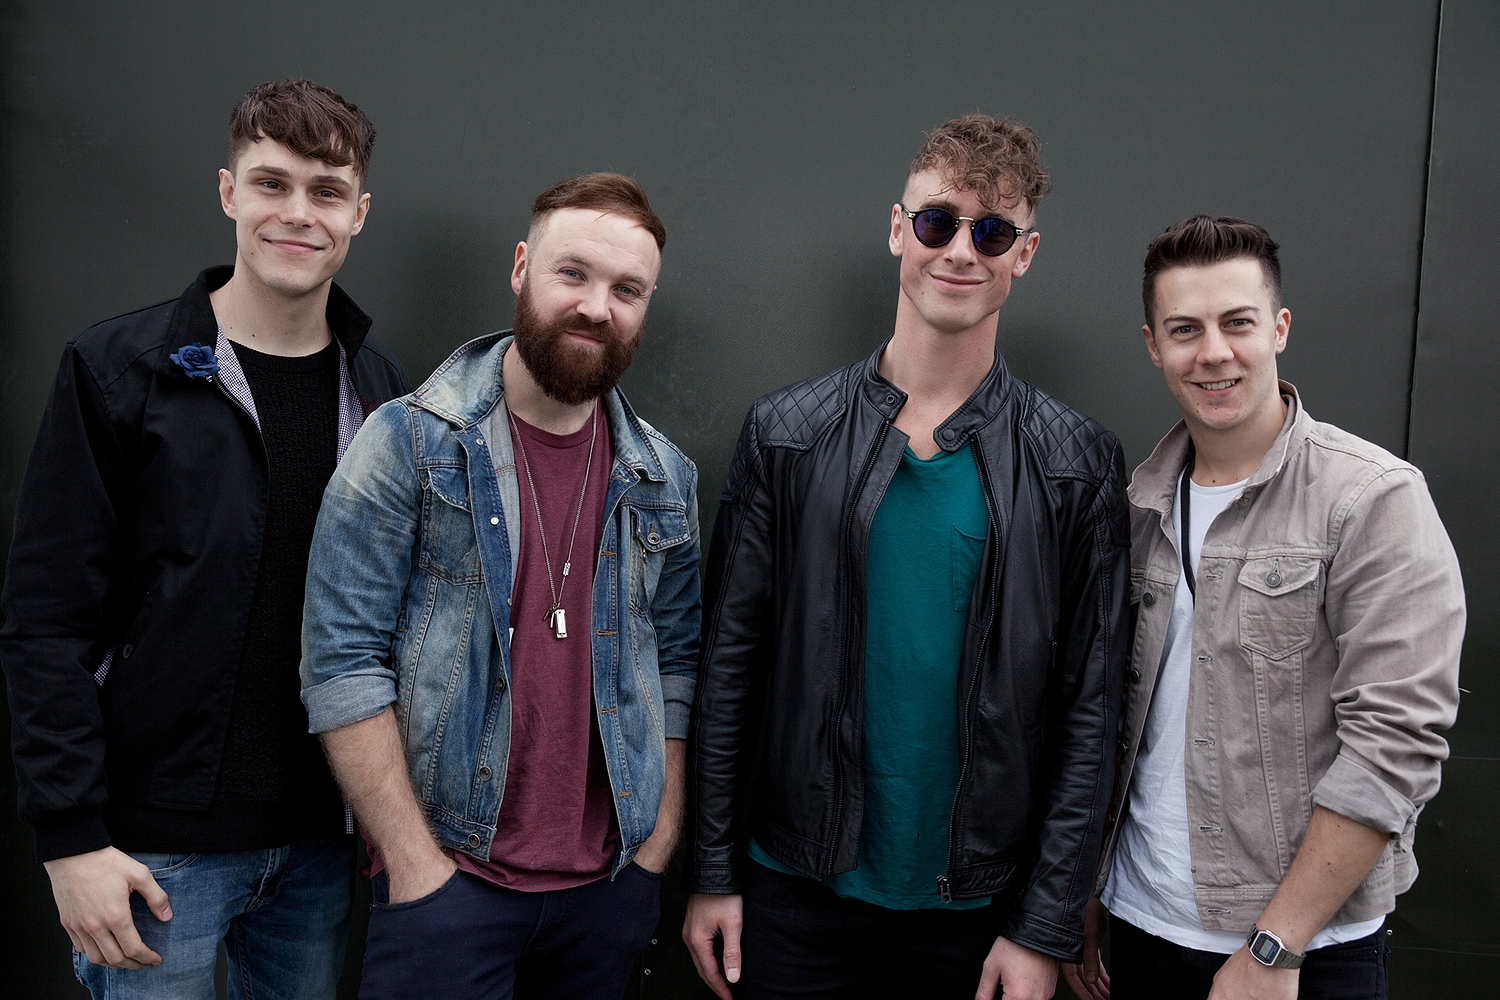 Don Broco instore signing announced before #STANDFORSOMETHING Tour date